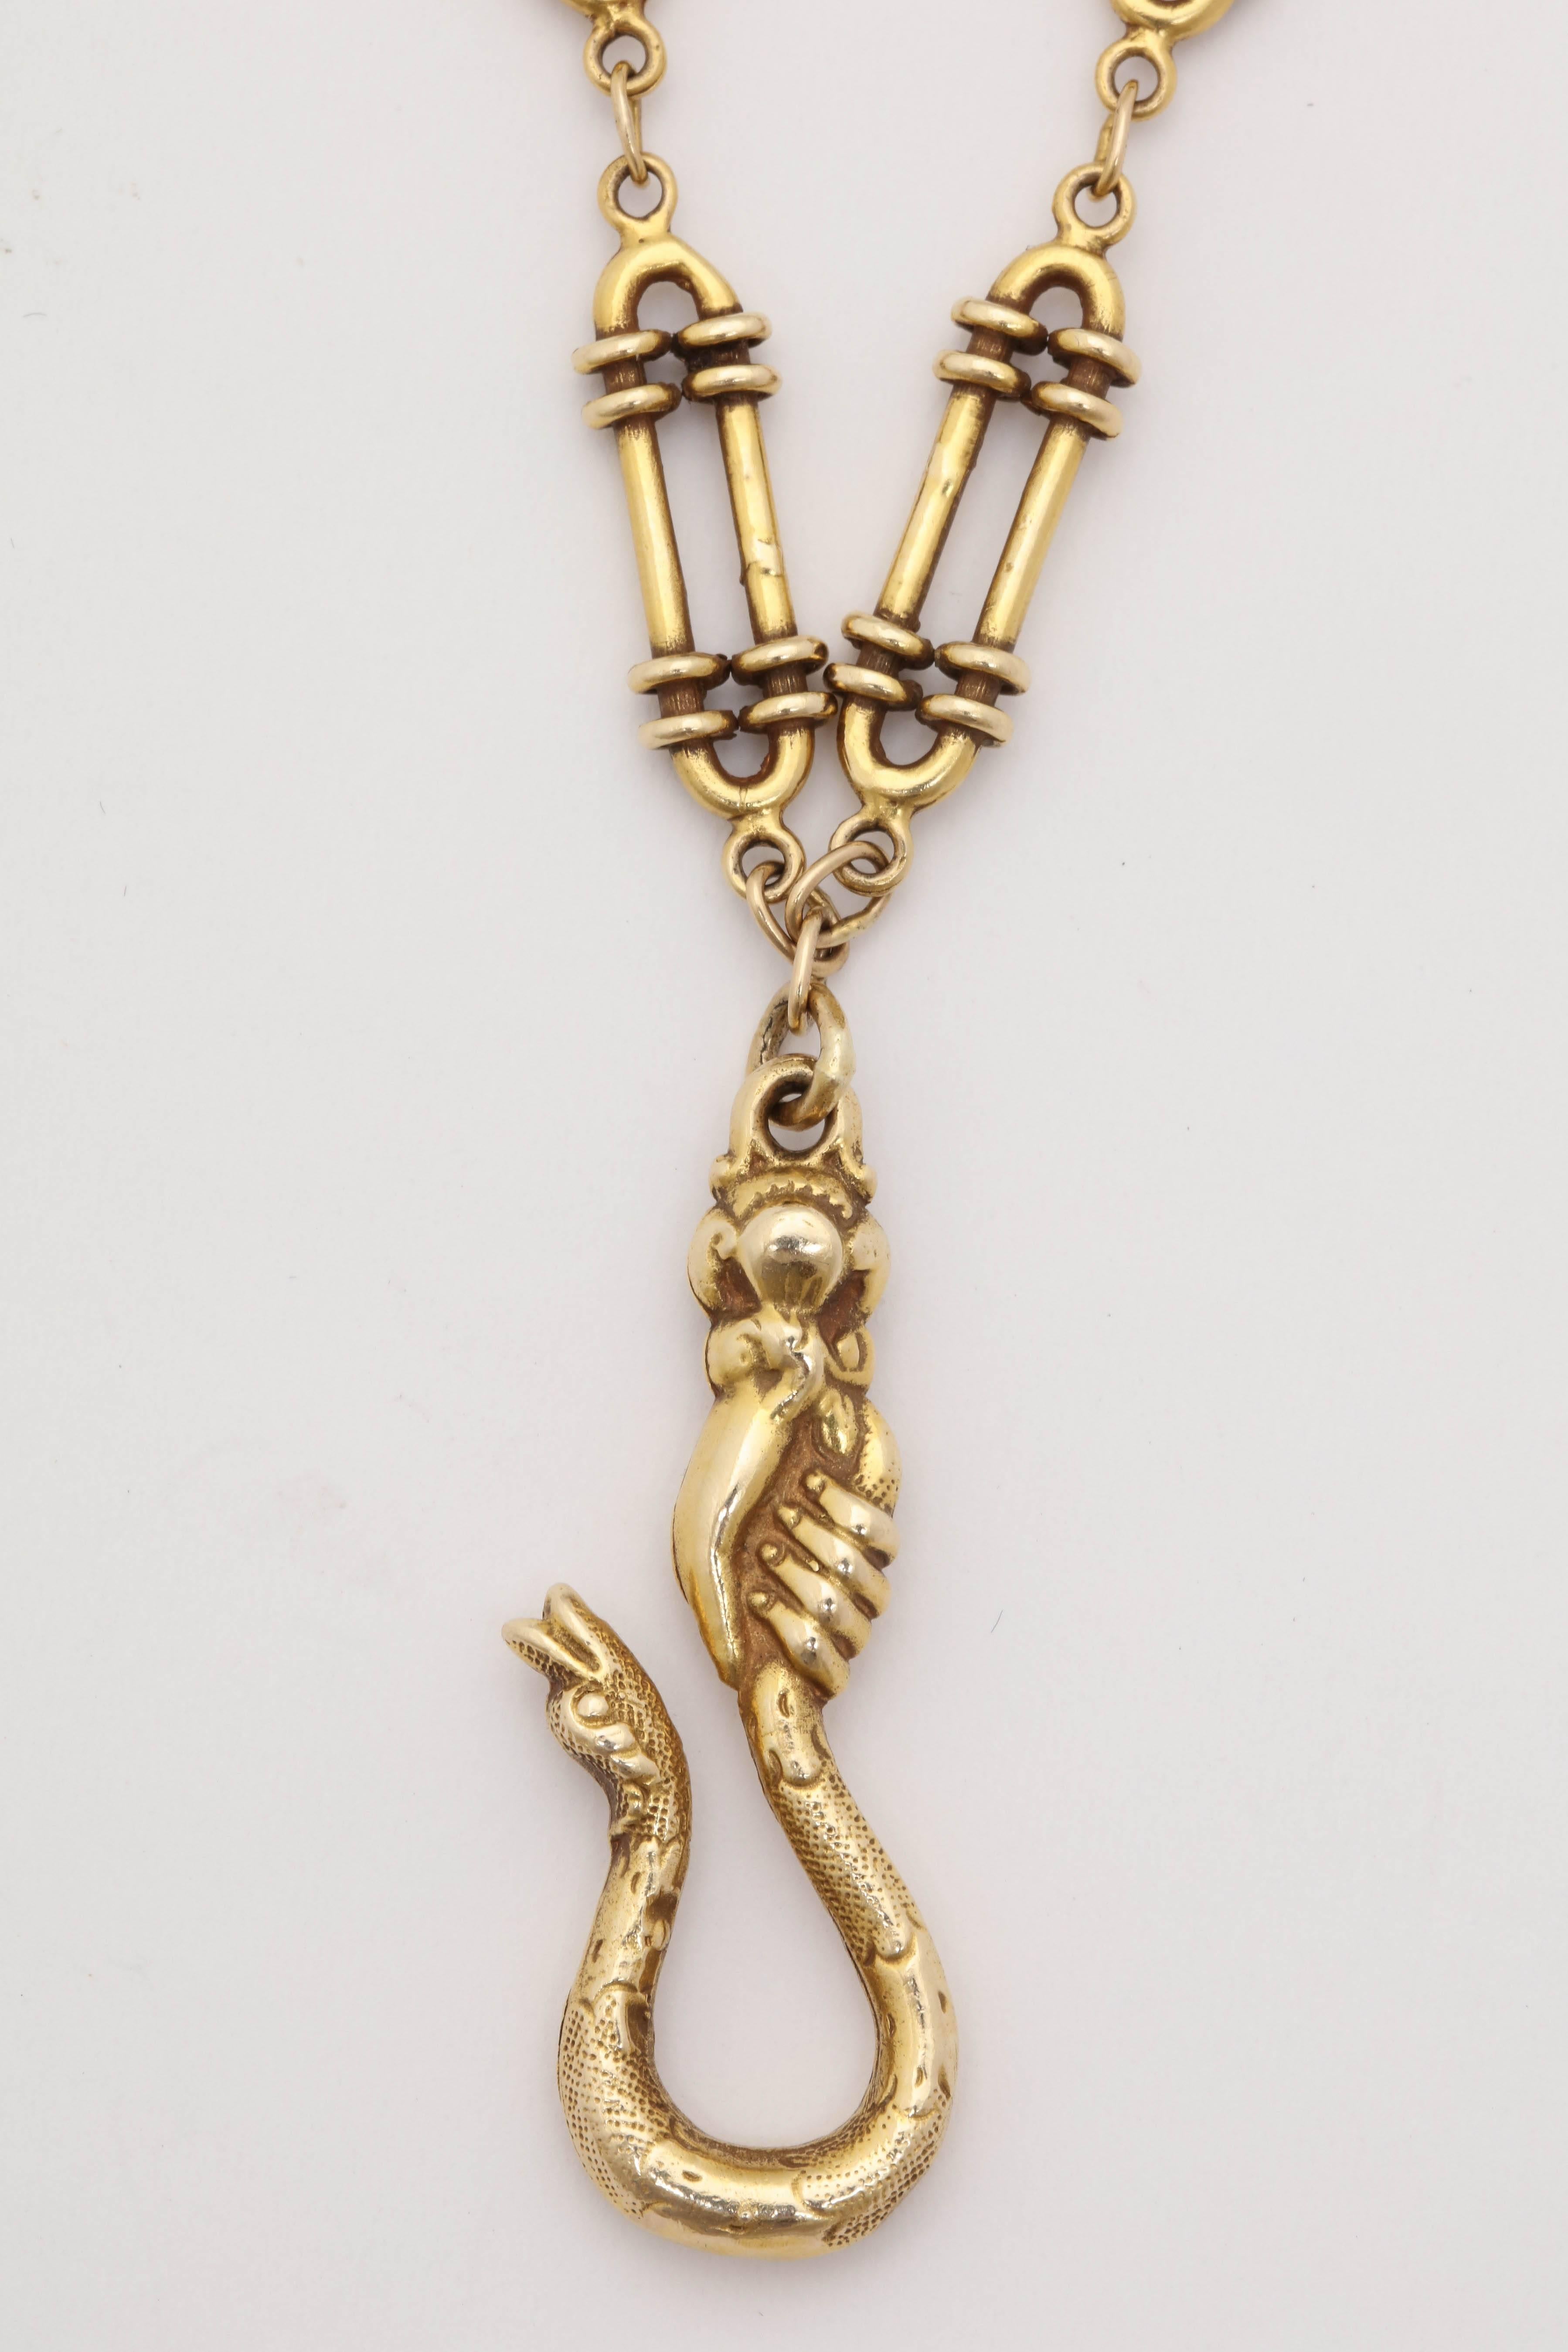 1930s Long Oblong Open Link Figural Hand Holding Snake Clasp Gold Chain 1